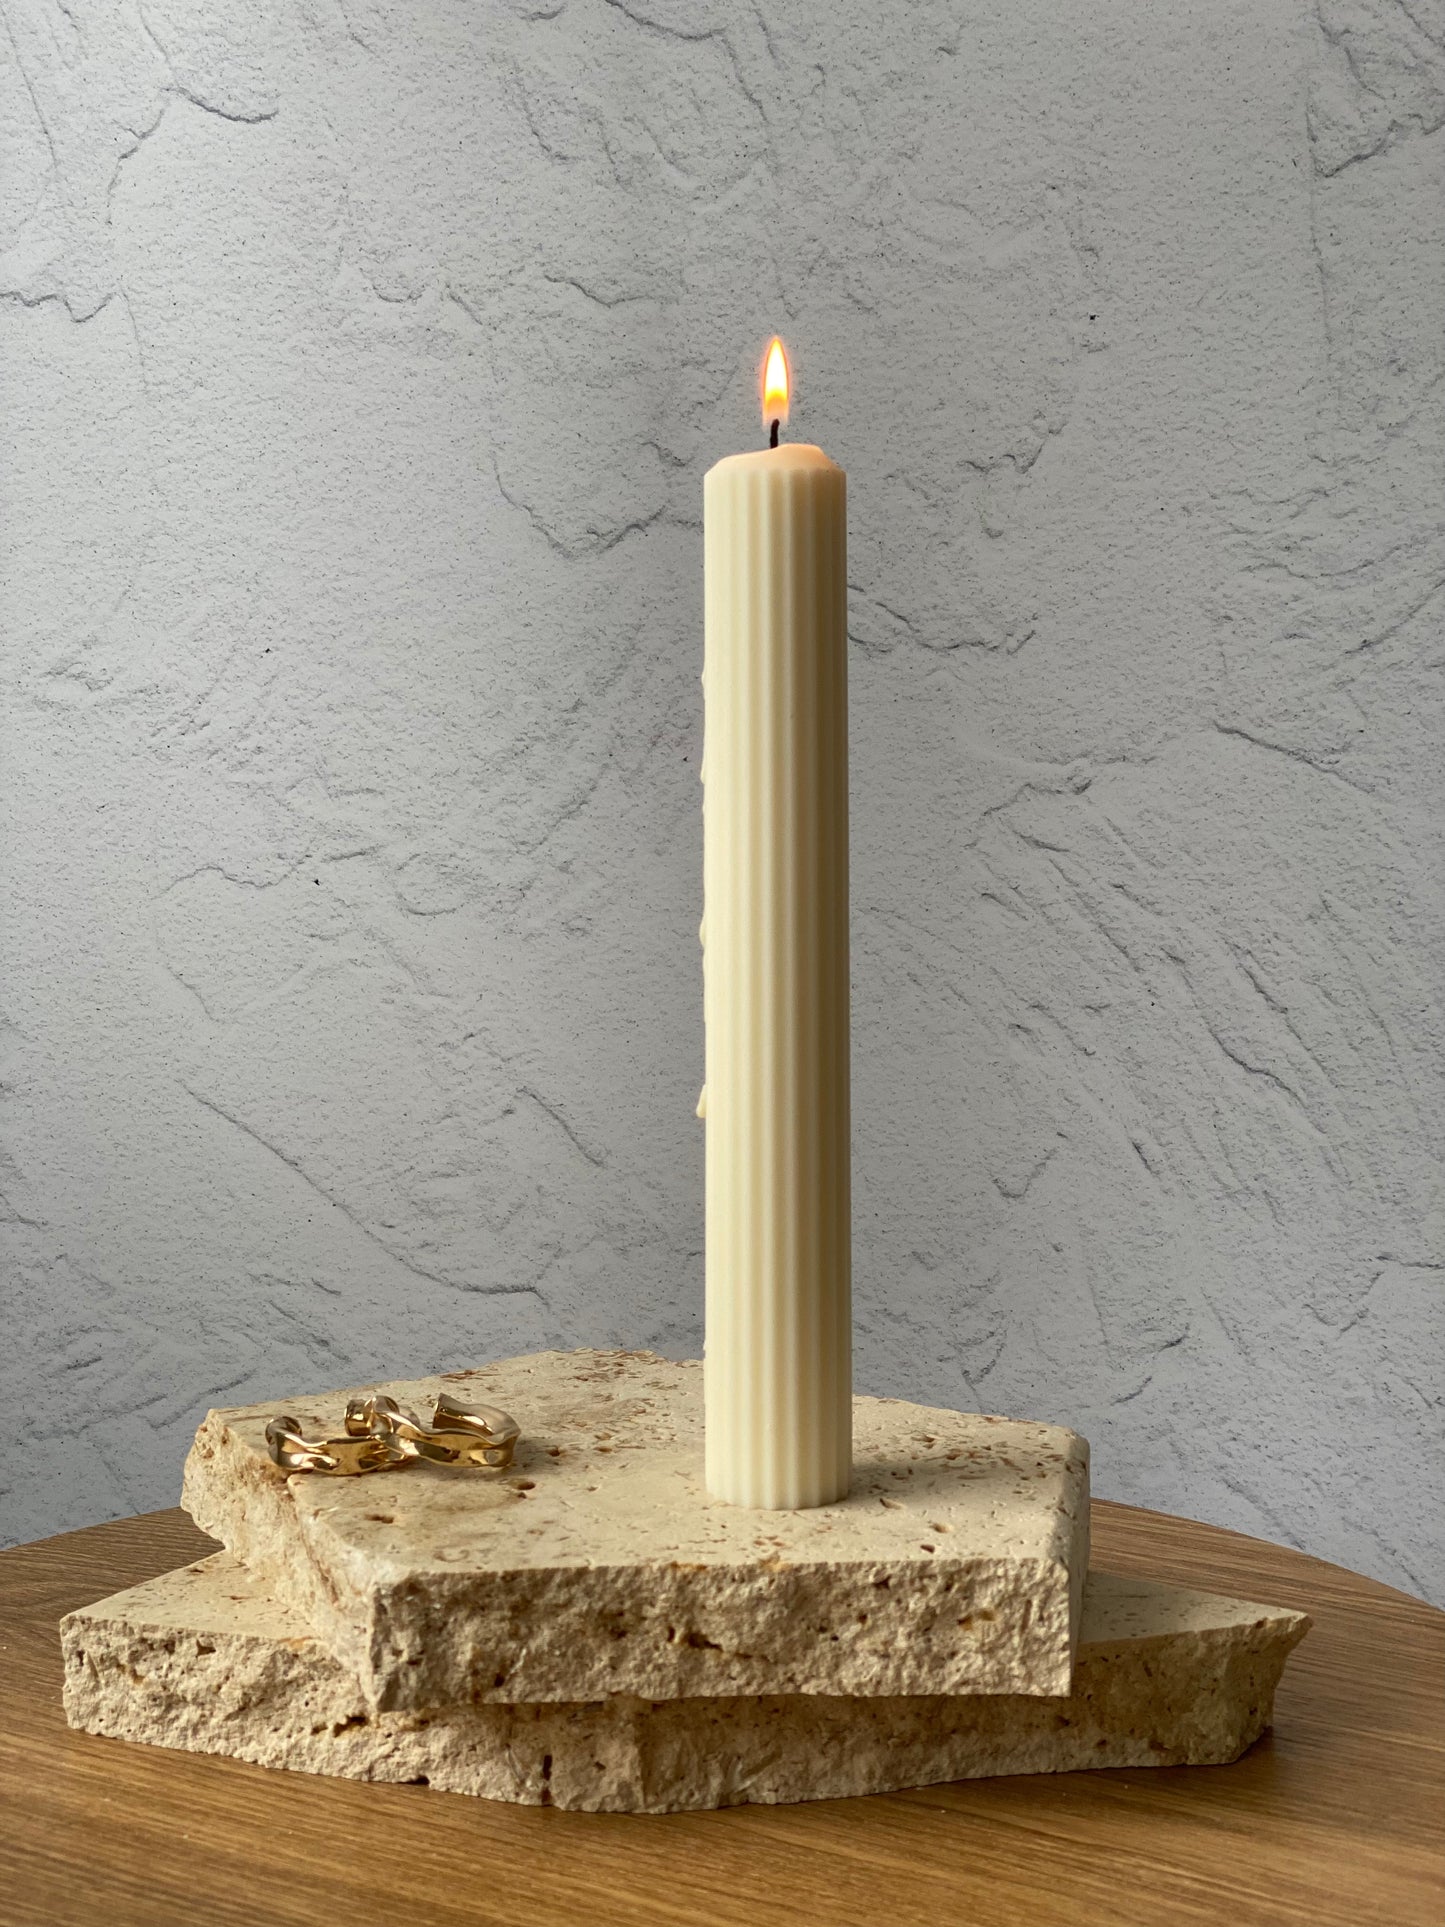 Case 25cm Thin Ribbed Pillar Candle | Wedding reception candles | Candle wedding centerpieces on a budget | Free Standing Candles | Paraffin Free Candles | Unscented Candles | Column Candles | Free Standing Candles Australia | Candles Australia | Sydney C